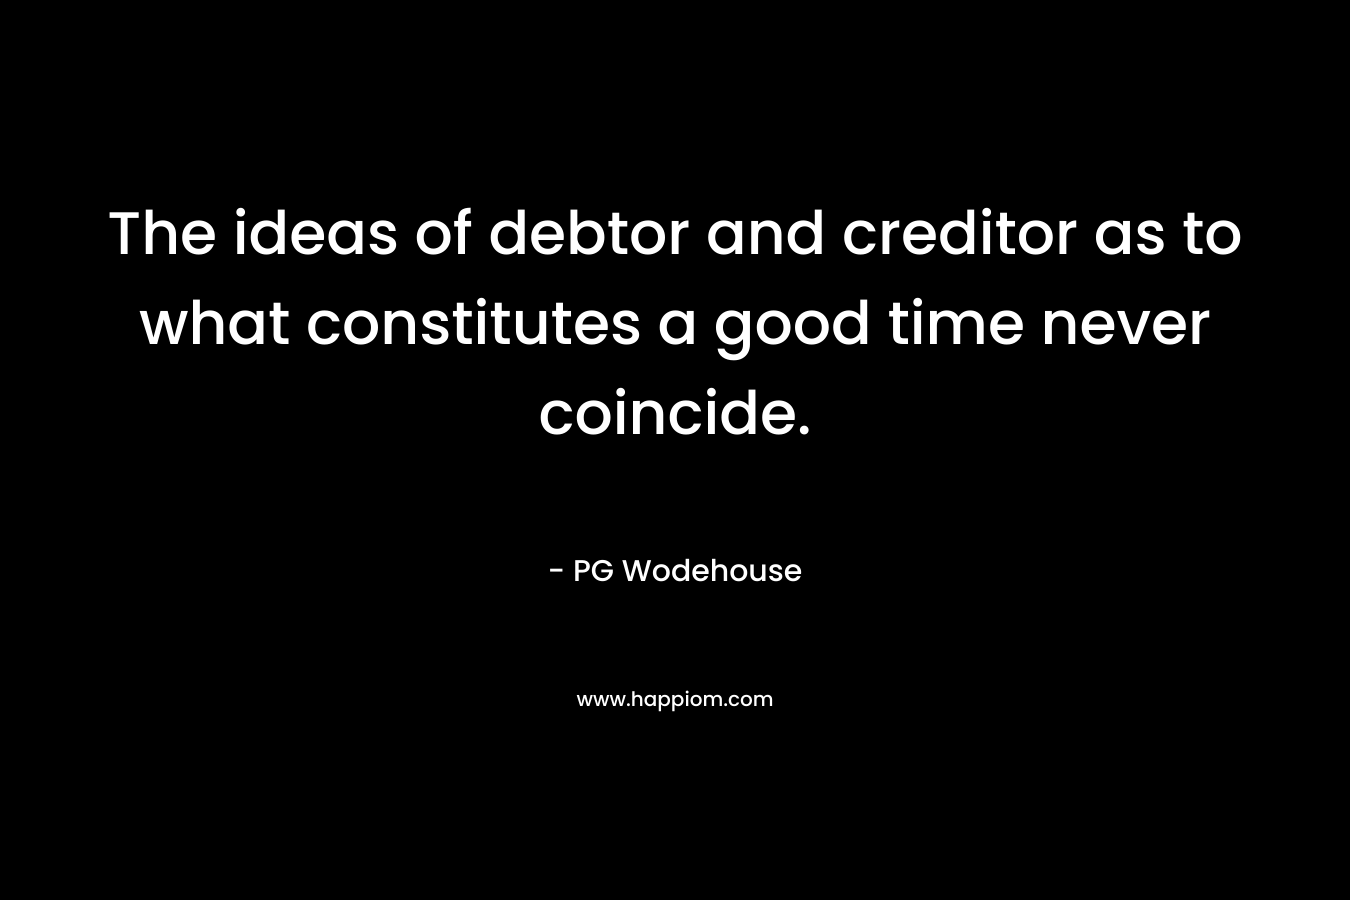 The ideas of debtor and creditor as to what constitutes a good time never coincide. – PG Wodehouse